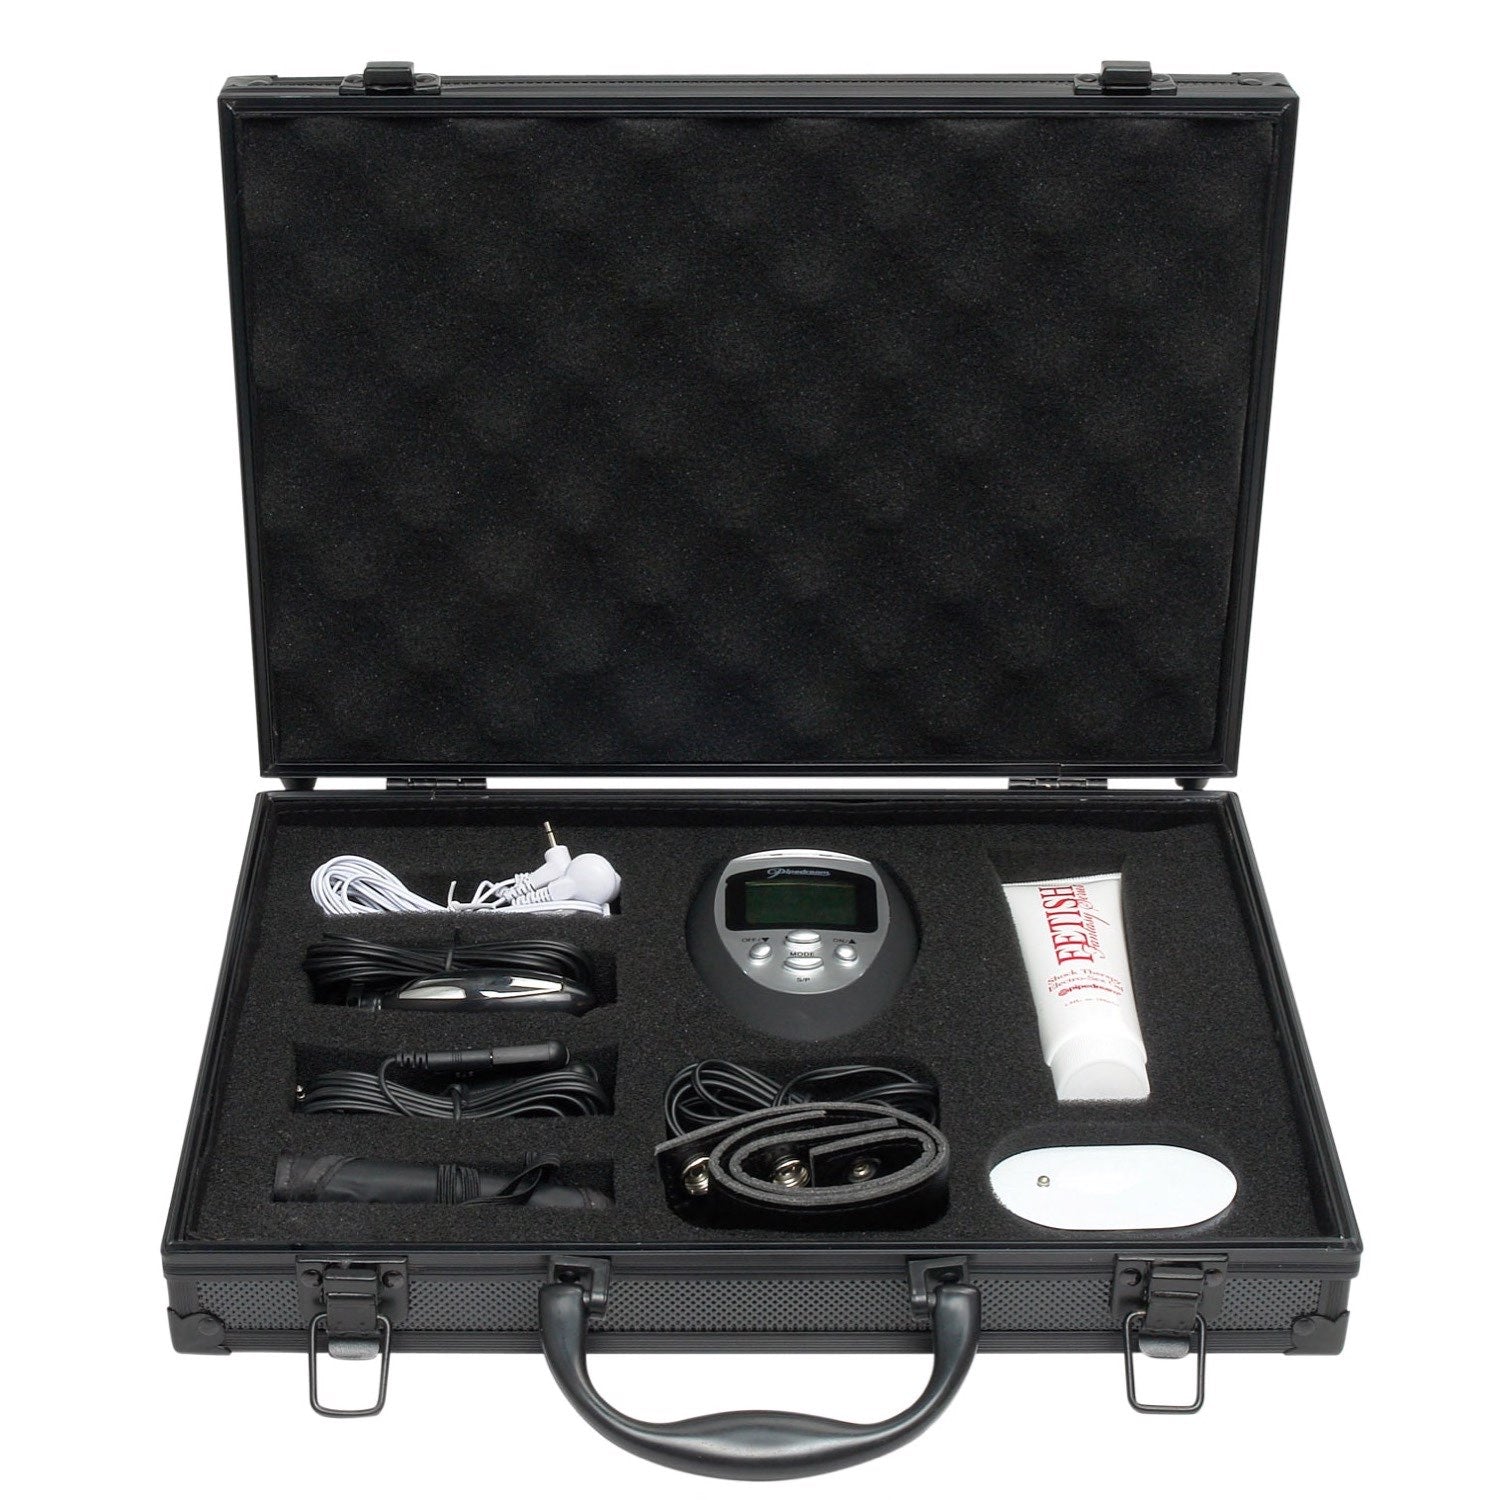 Fetish Fantasy Series Deluxe Shock Therapy Travel Kit - Electrical Stimulator Kit - 6 Piece Set by Pipedream